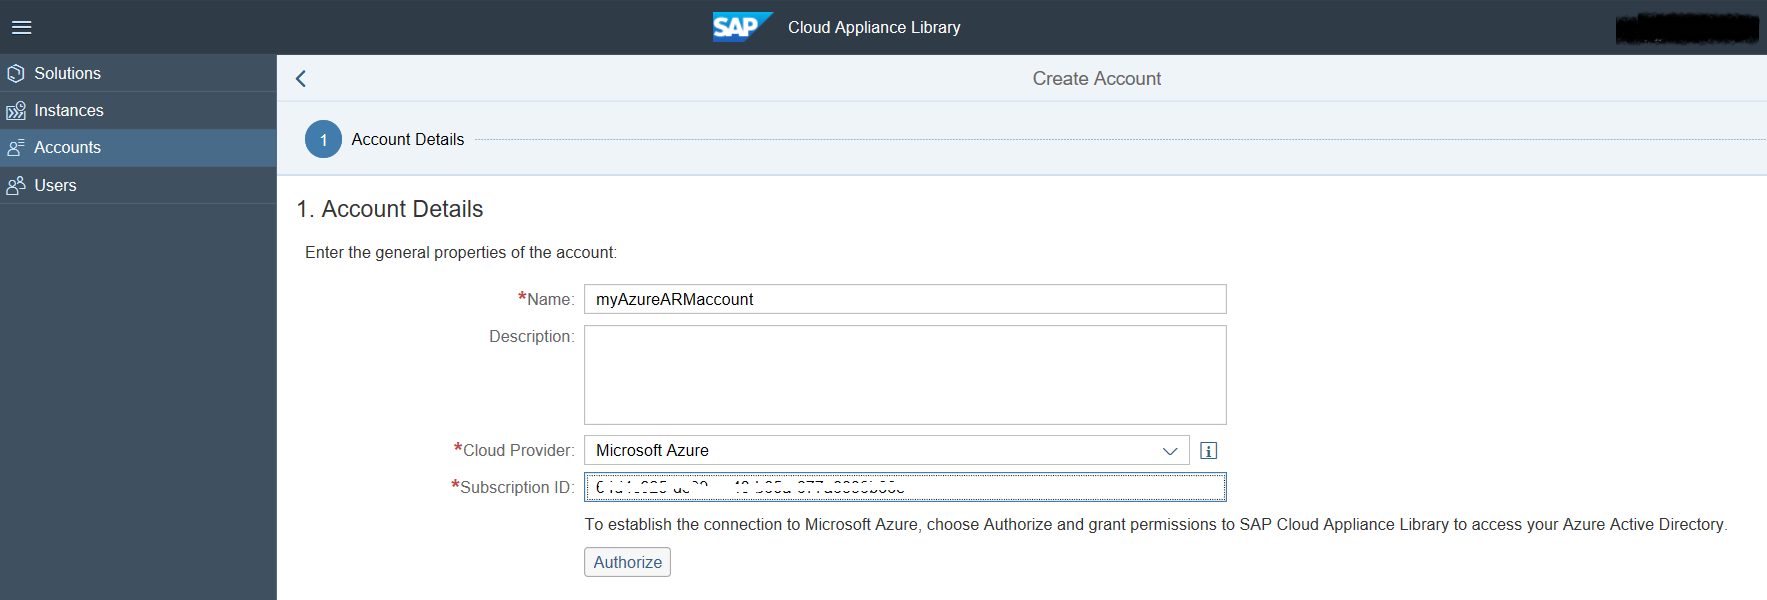 Deploy SAP IDES EHP7 SP3 for SAP ERP 6.0 on Azure | Microsoft Learn